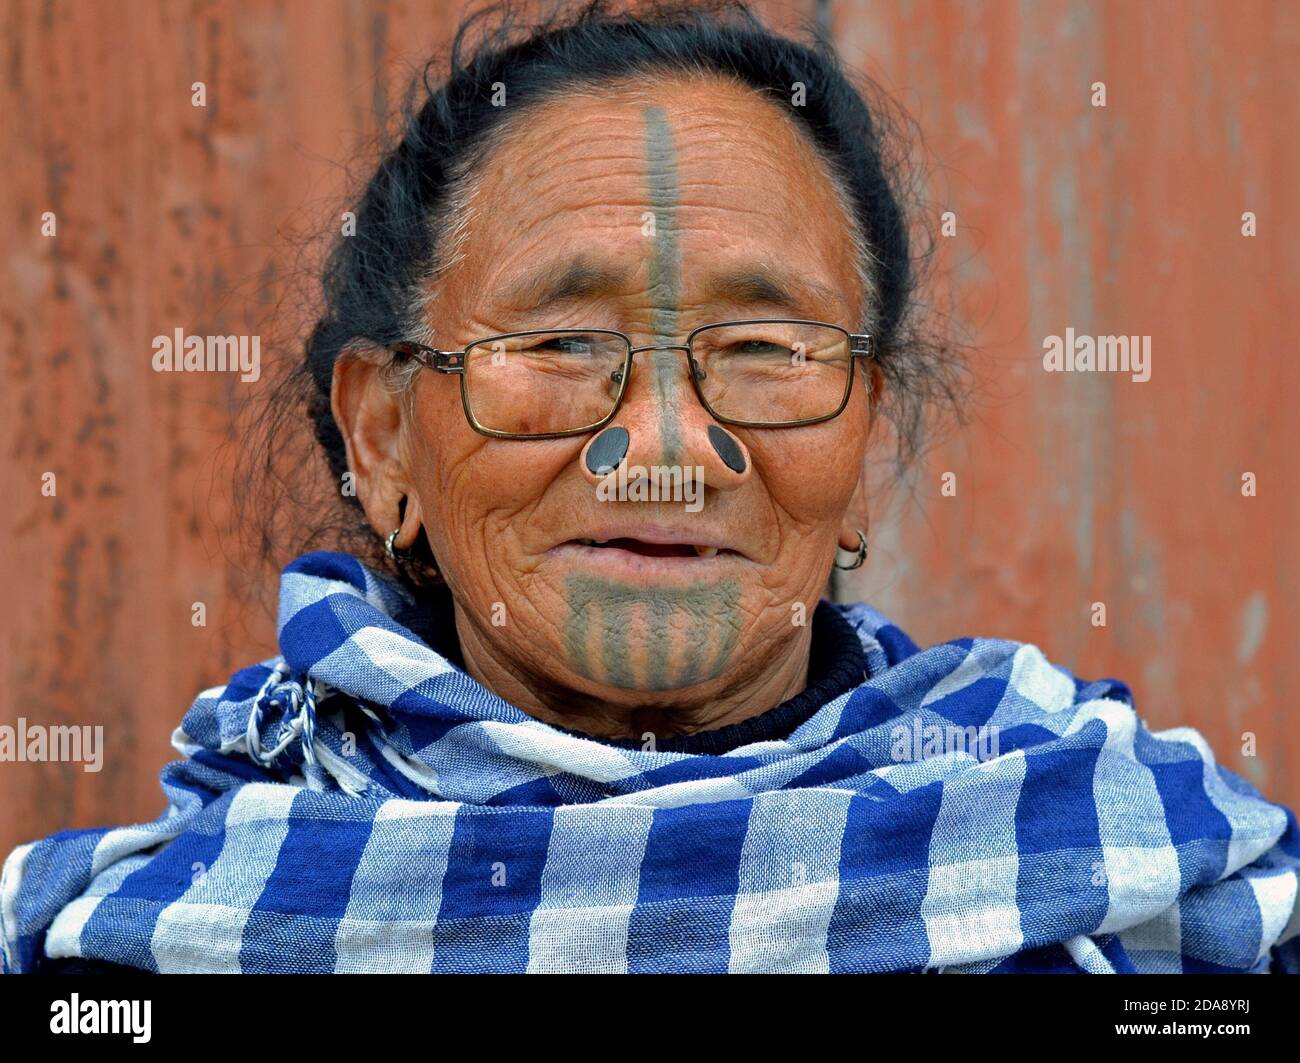 Old Northeast Indian Apatani tribal woman with black wooden nose plugs and traditional face tattoo wears modern eyeglasses and poses for the camera. Stock Photo